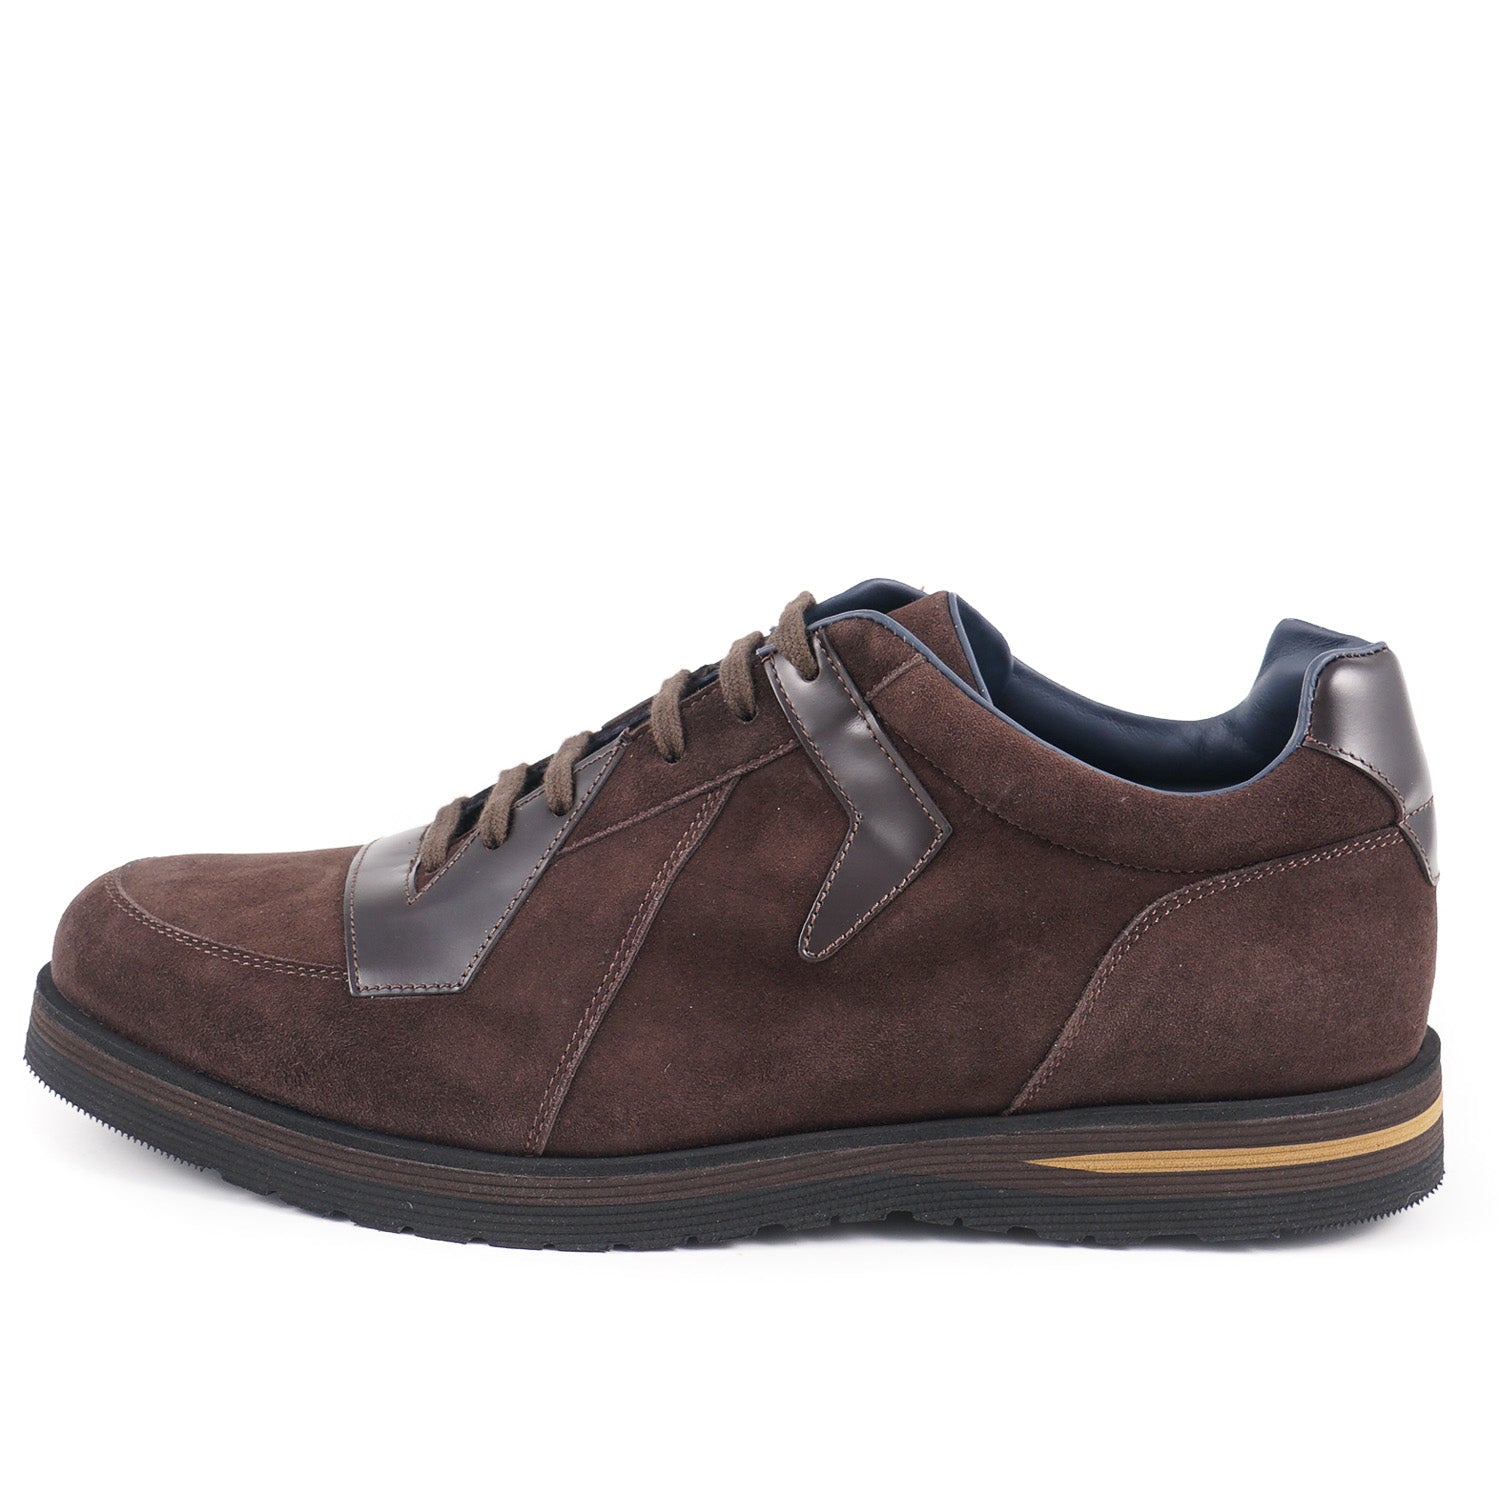 Zilli Calf Suede and Leather Sneakers - Top Shelf Apparel